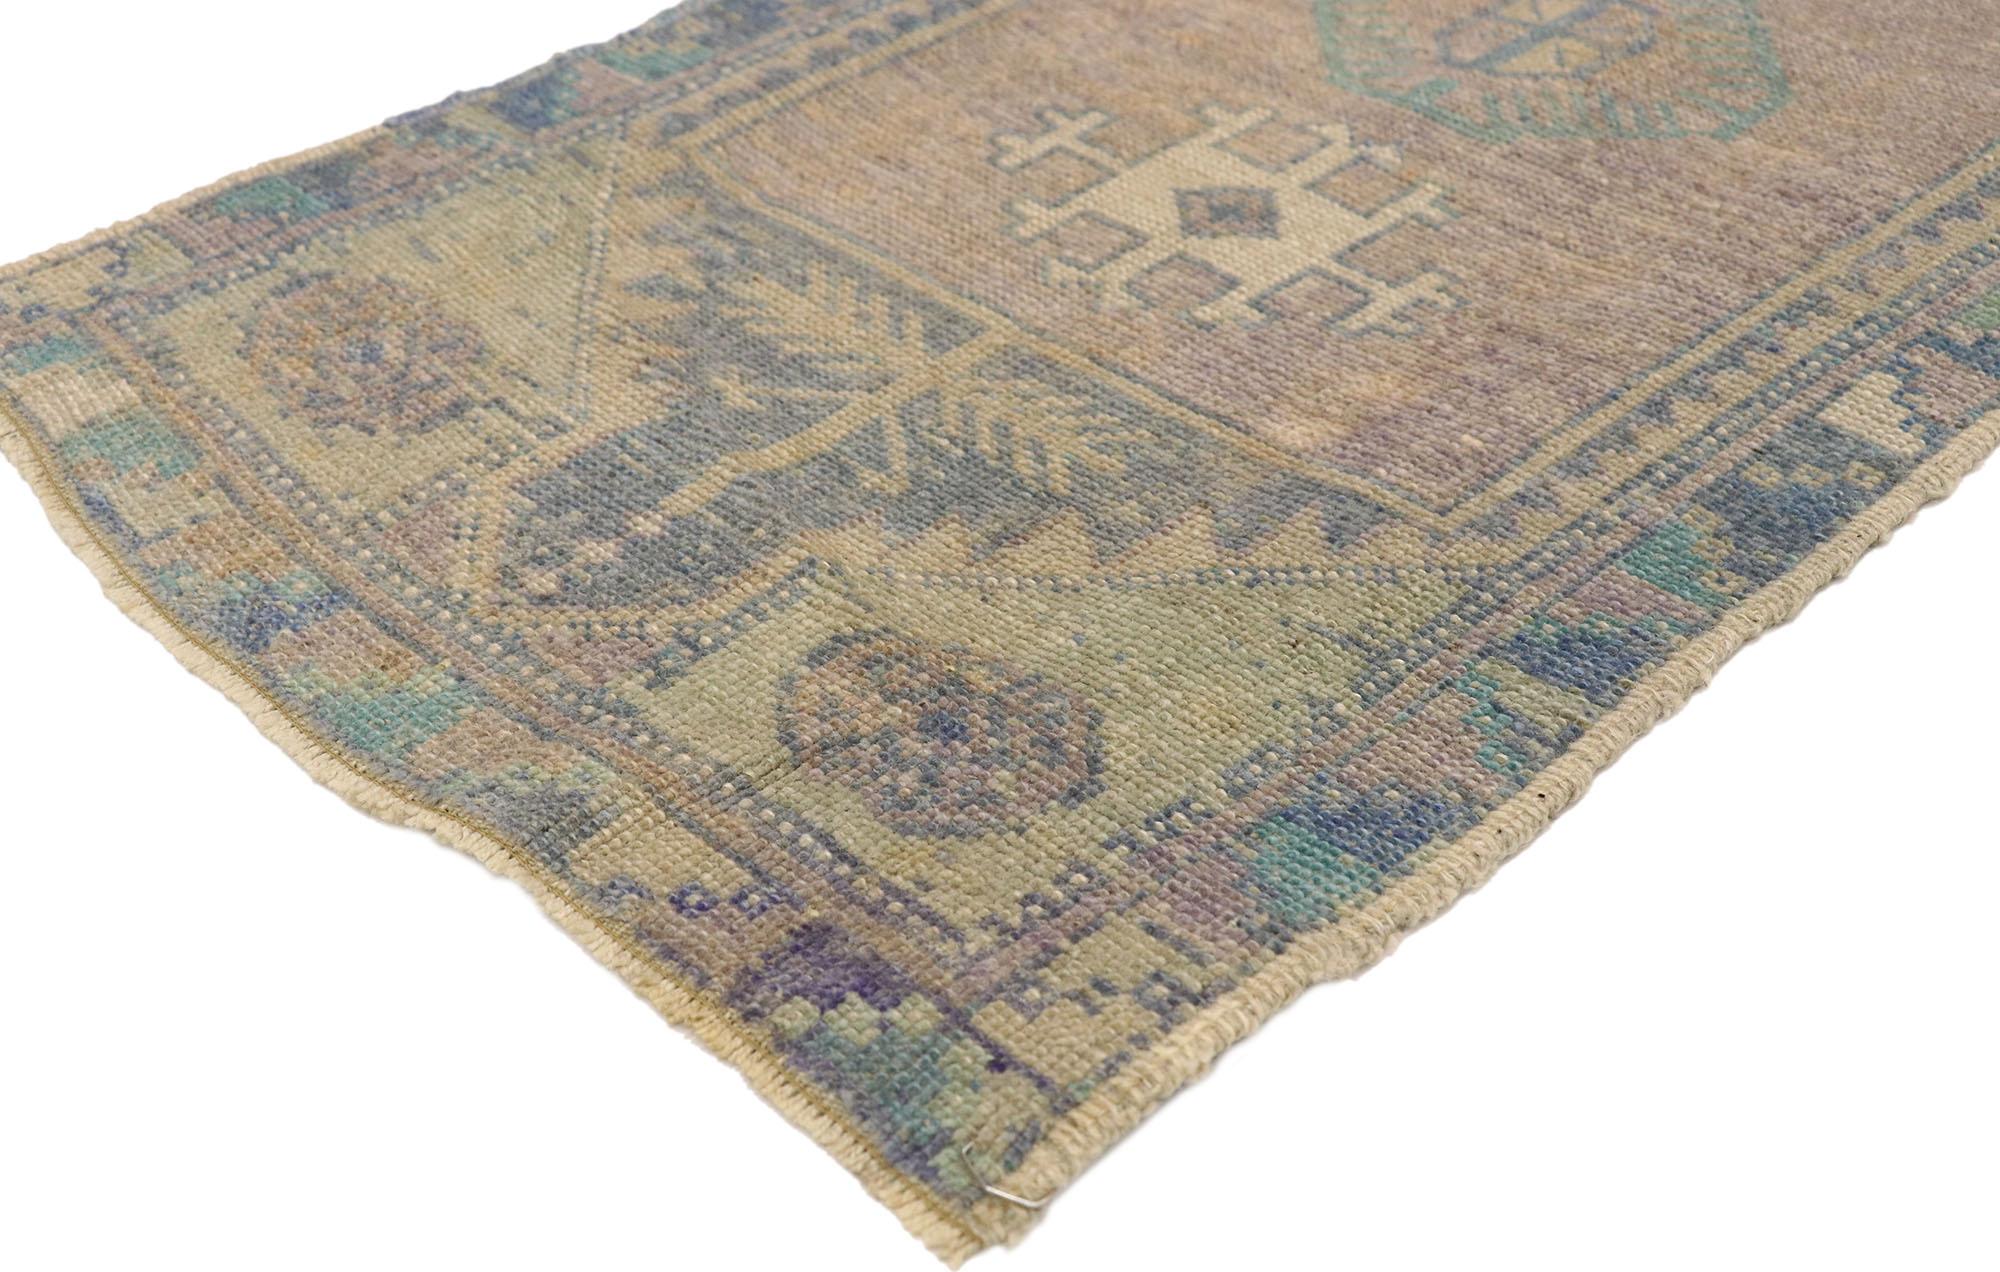 52271 Vintage Turkish Oushak Rug, 01'08 x 03'00. In this hand-knotted wool vintage Turkish Oushak rug, Boho Chic aesthetics converge with tribal enchantment to create a captivating visual narrative. At the heart of the composition lies a central gul